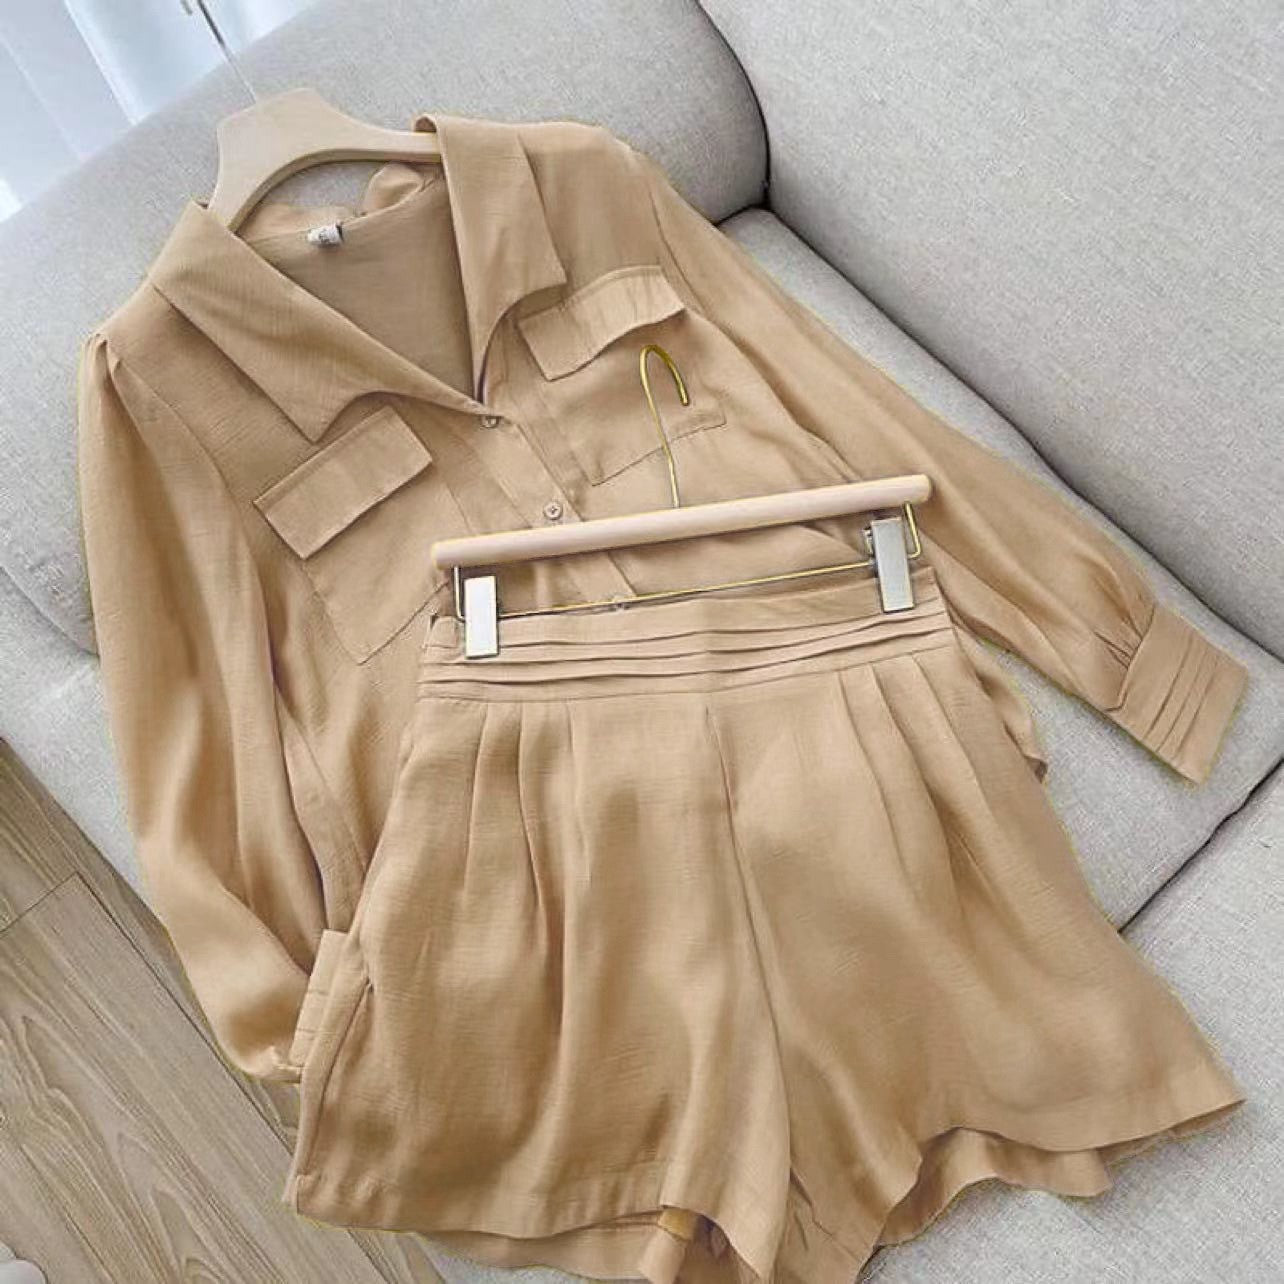 Women's Temperament Fashion Sports And Leisure Suit